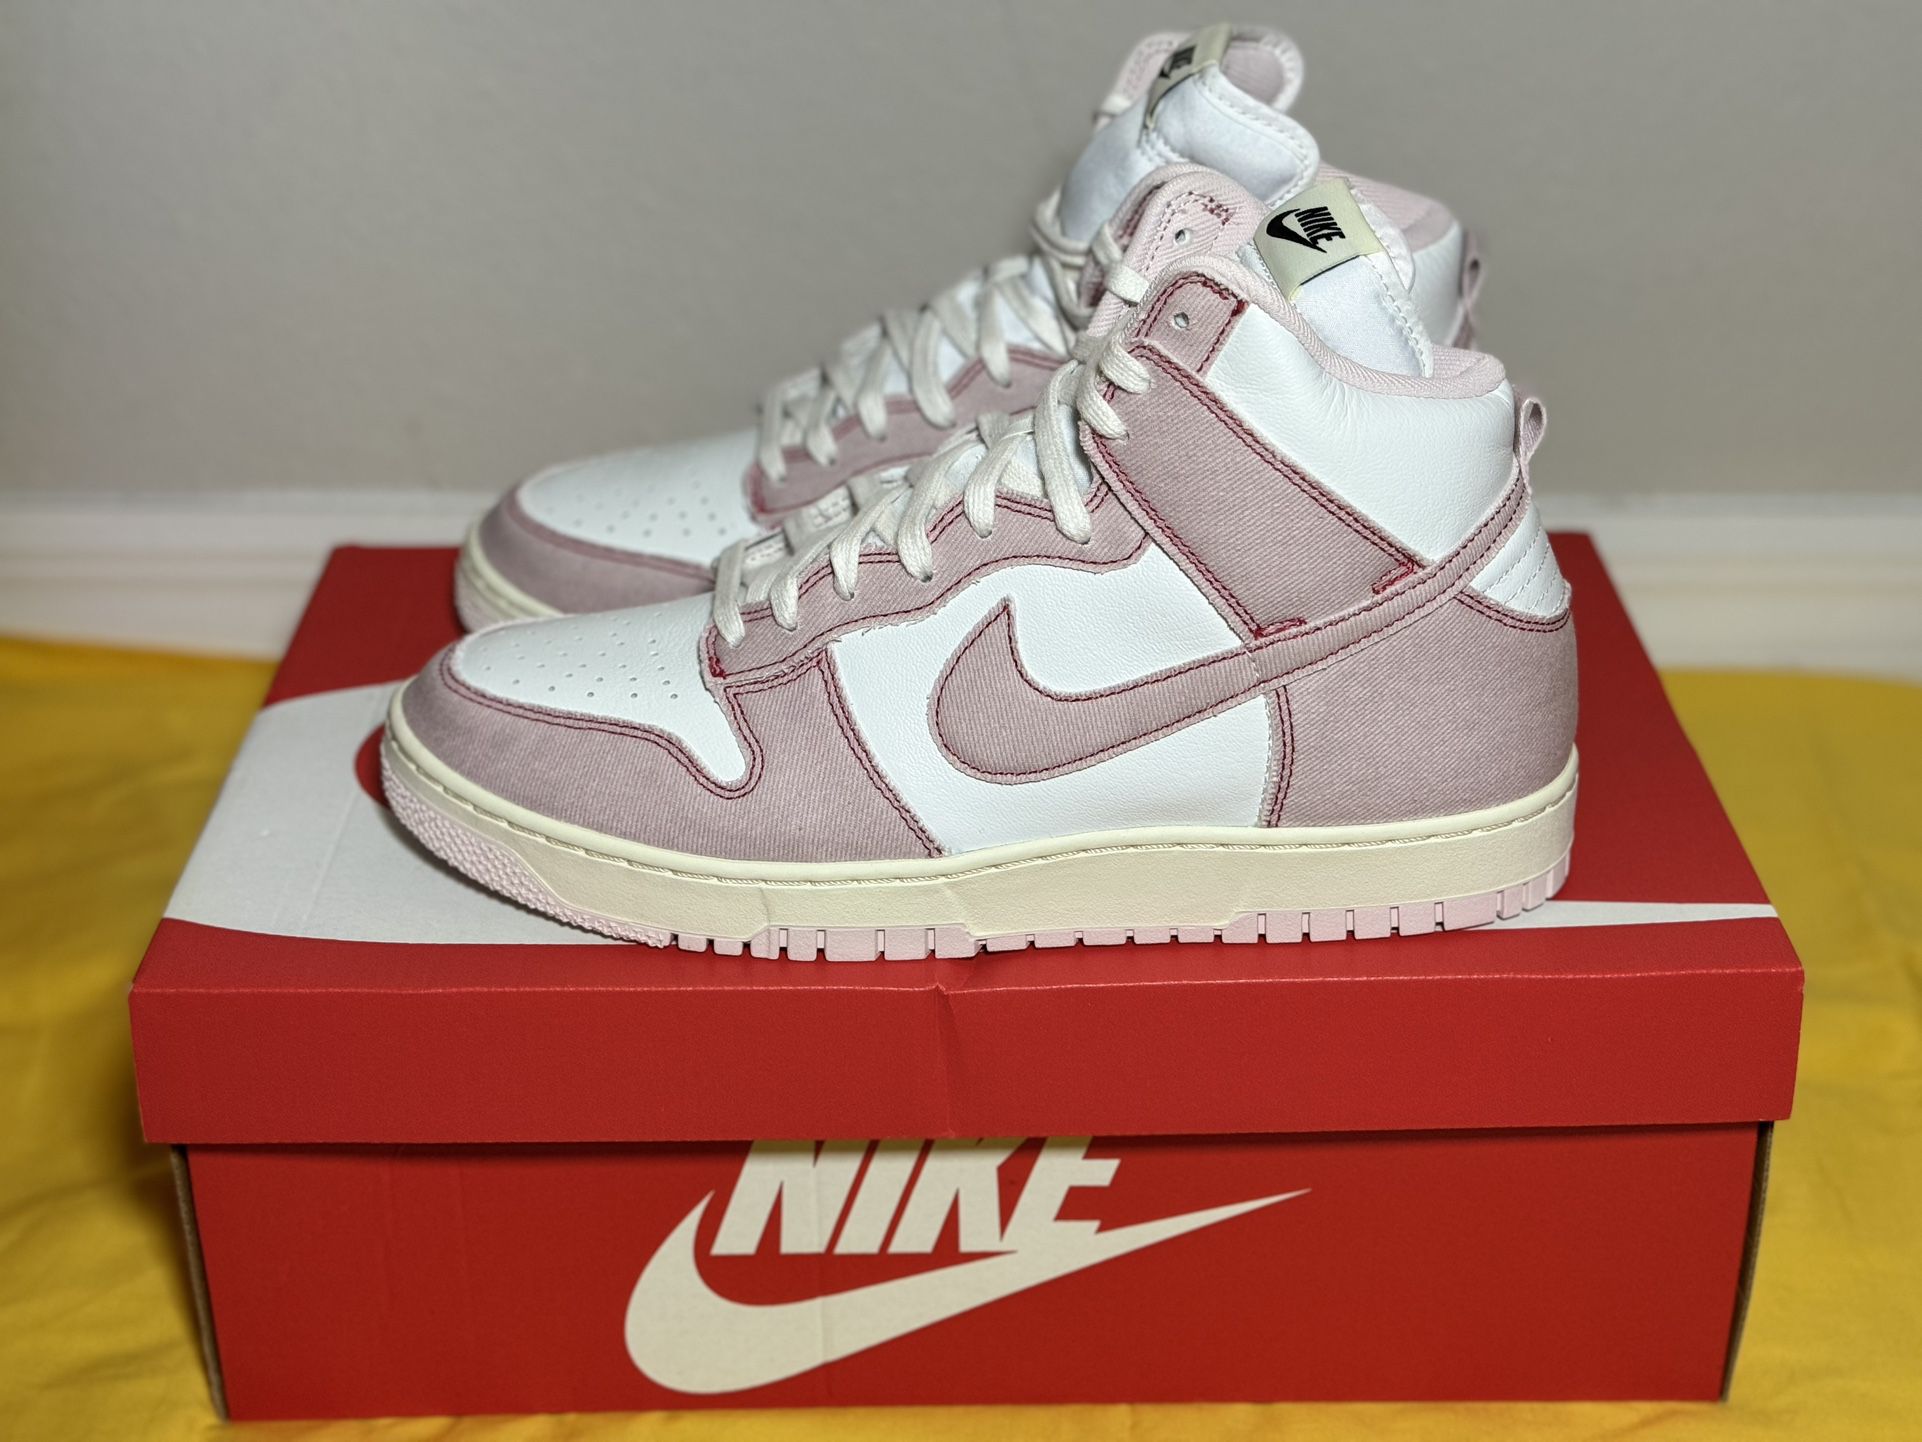 Nike Dunk High 1985 'Barely Rose' - Brand New, Size 11.5, Retro Style